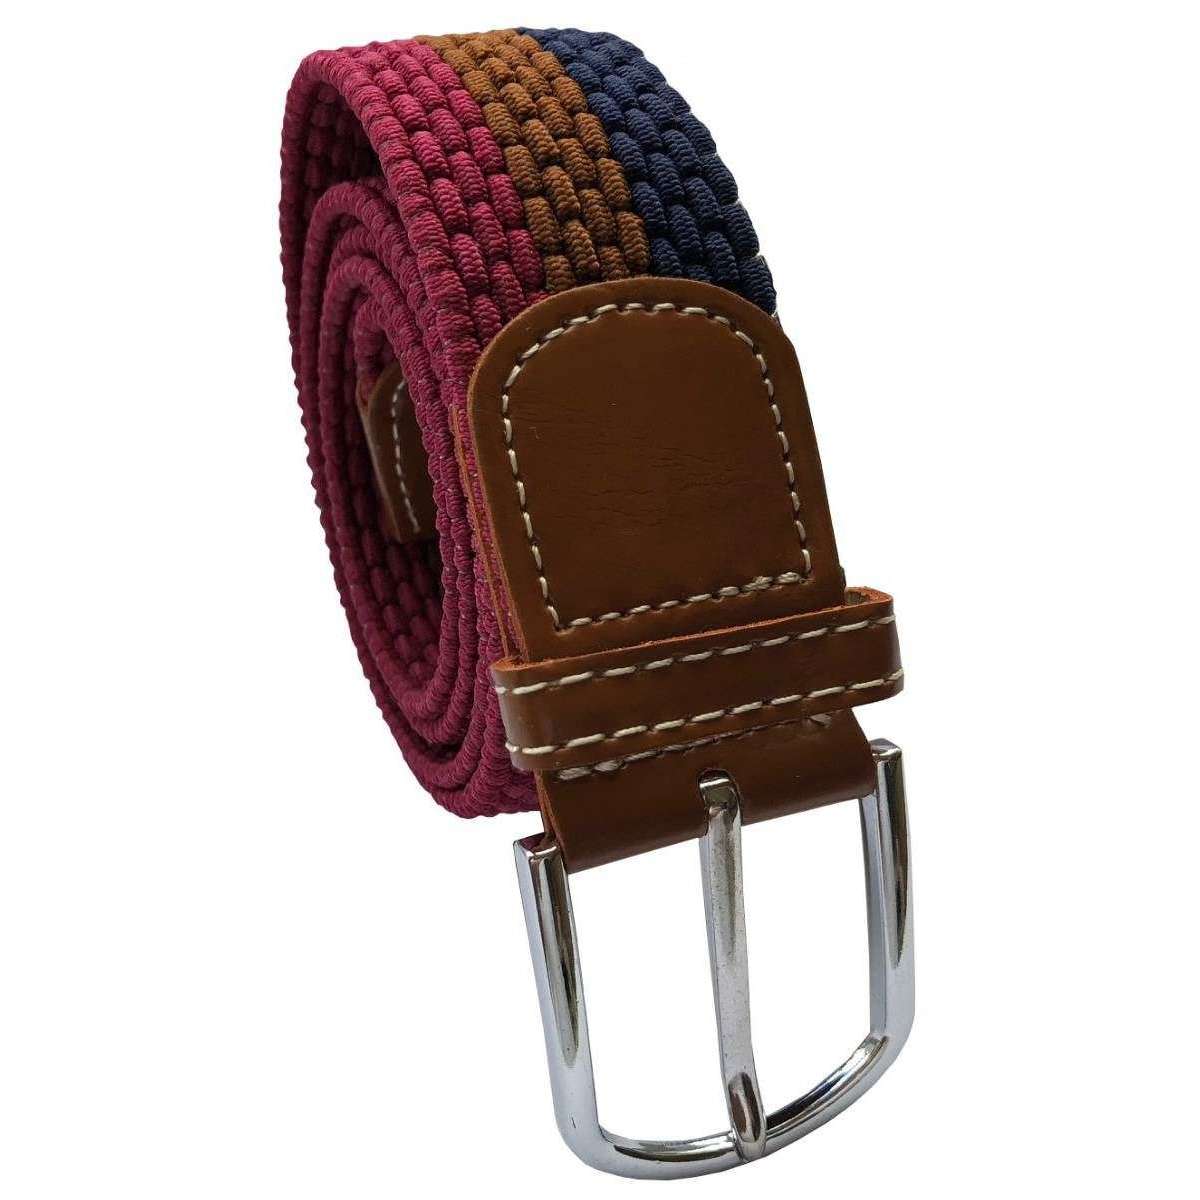 Bassin and Brown Horizontal Stripe Woven Belt - Navy/Wine/Brown